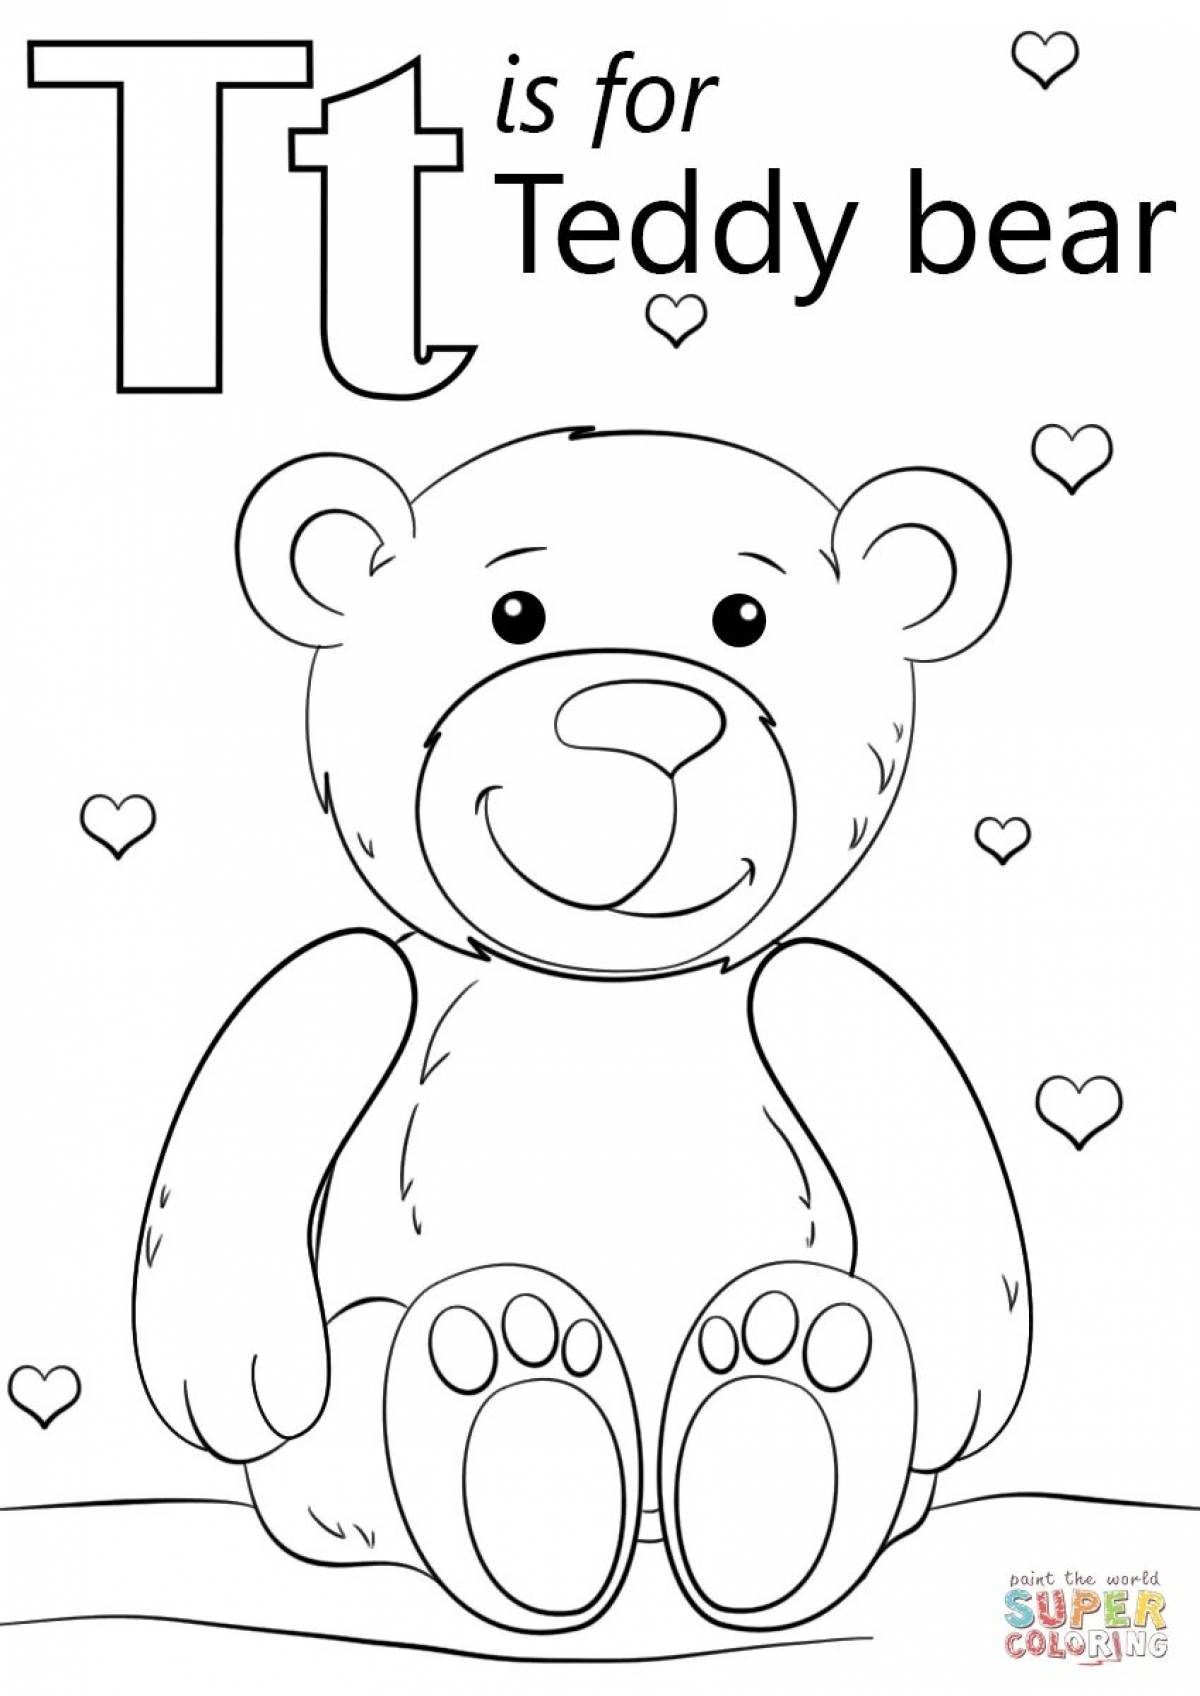 Delighted teddy bear coloring book